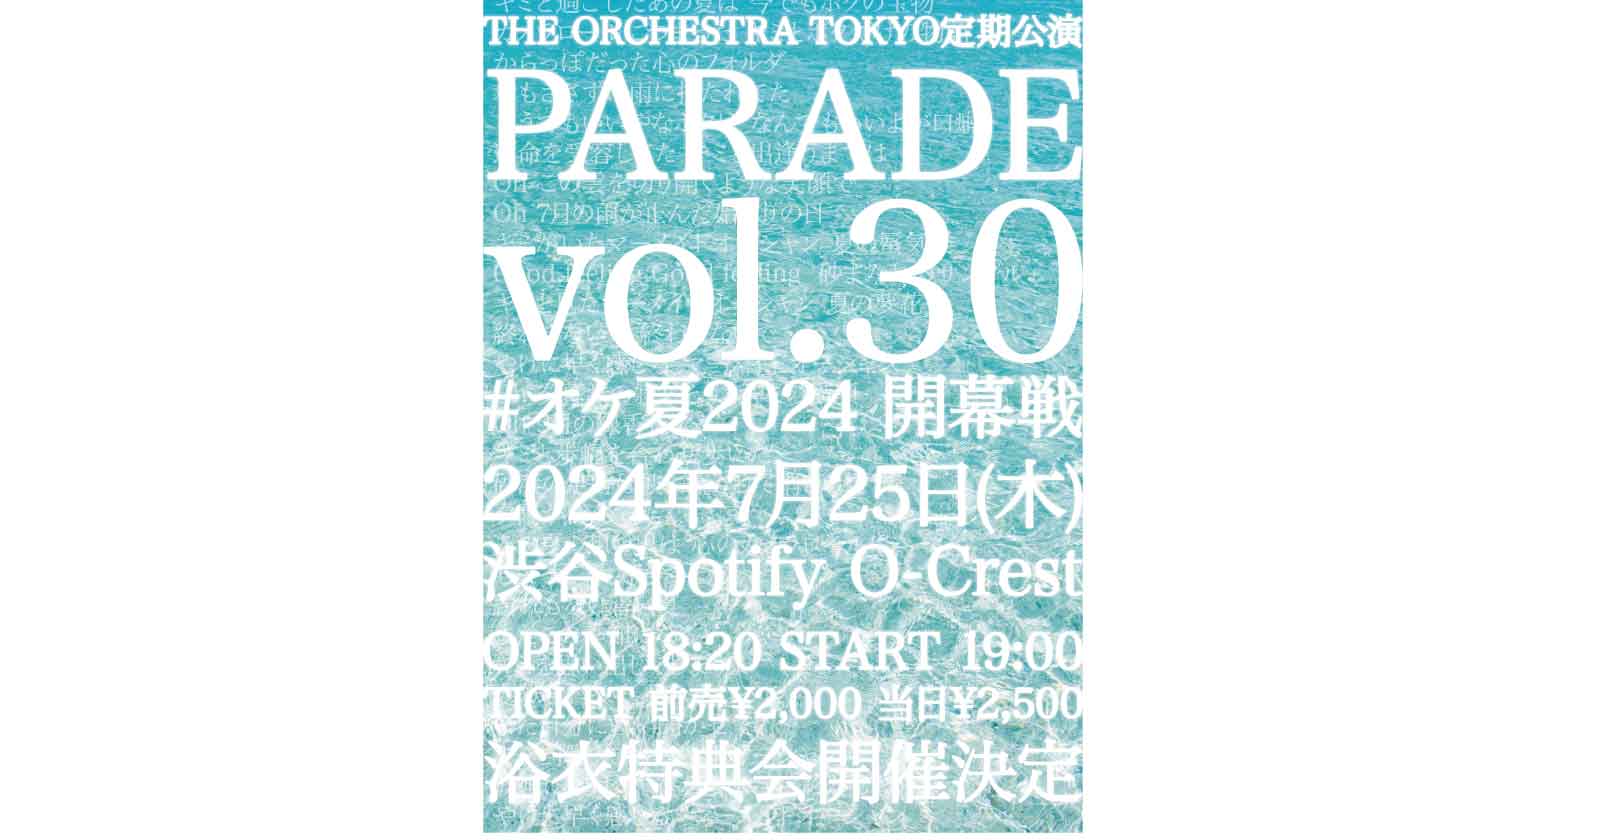 24/7/25_THE ORCHESTRA TOKYO